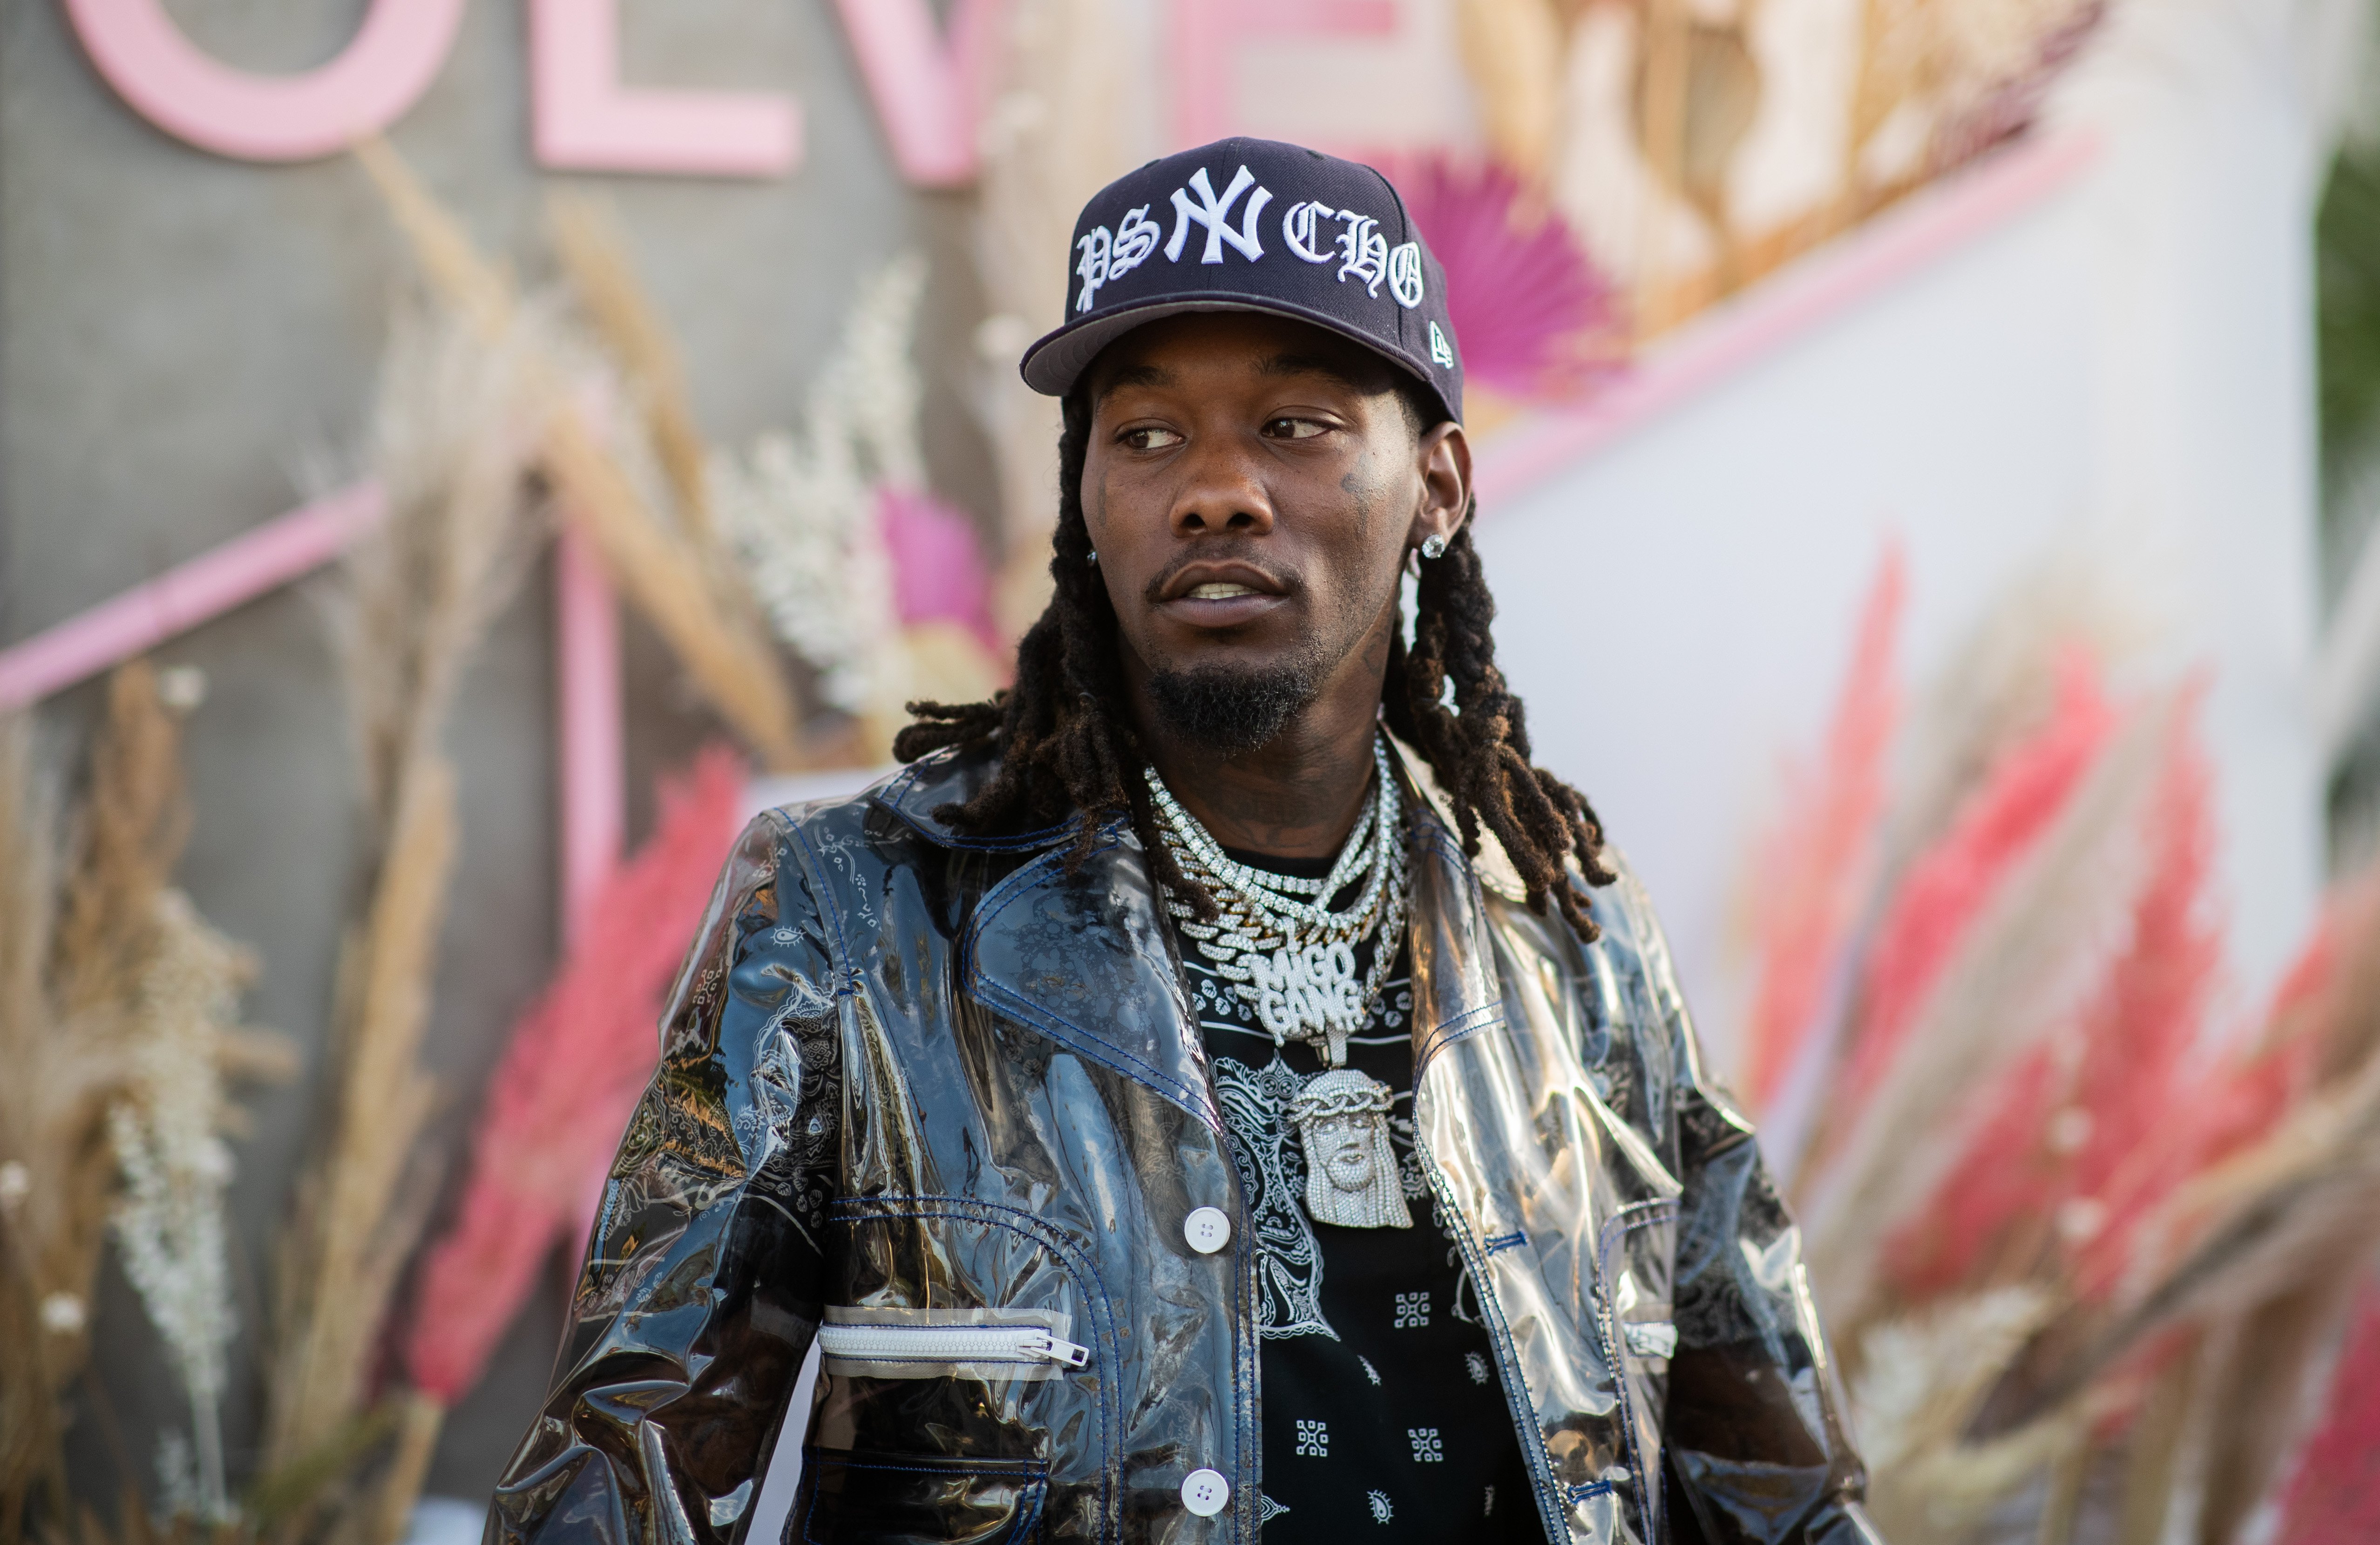 Offset pictured during Coachella Festival on April 14, 2019 in La Quinta, California. | Source: Getty Images